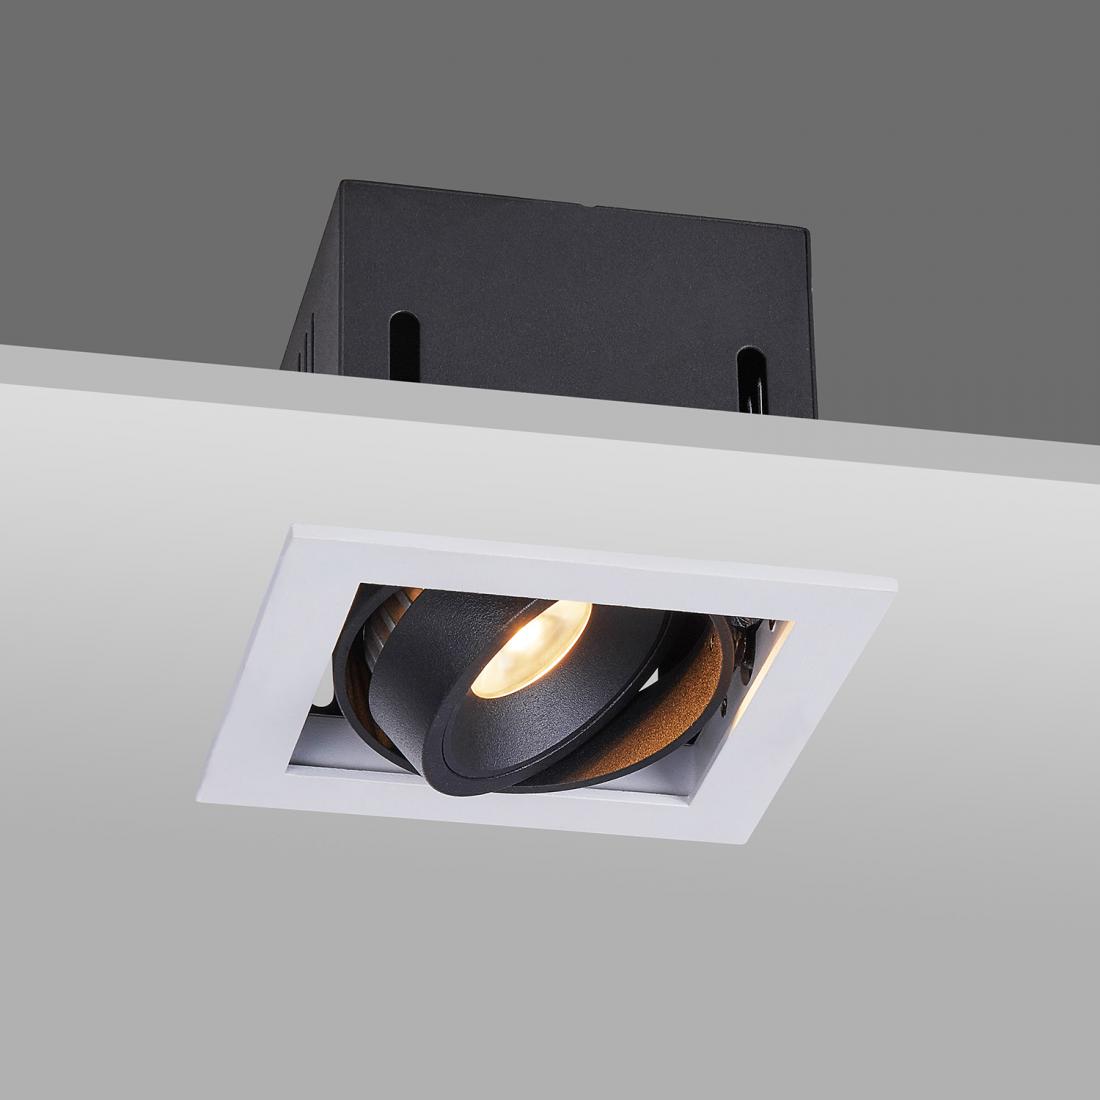 7W adjustable LED recessed square down light 